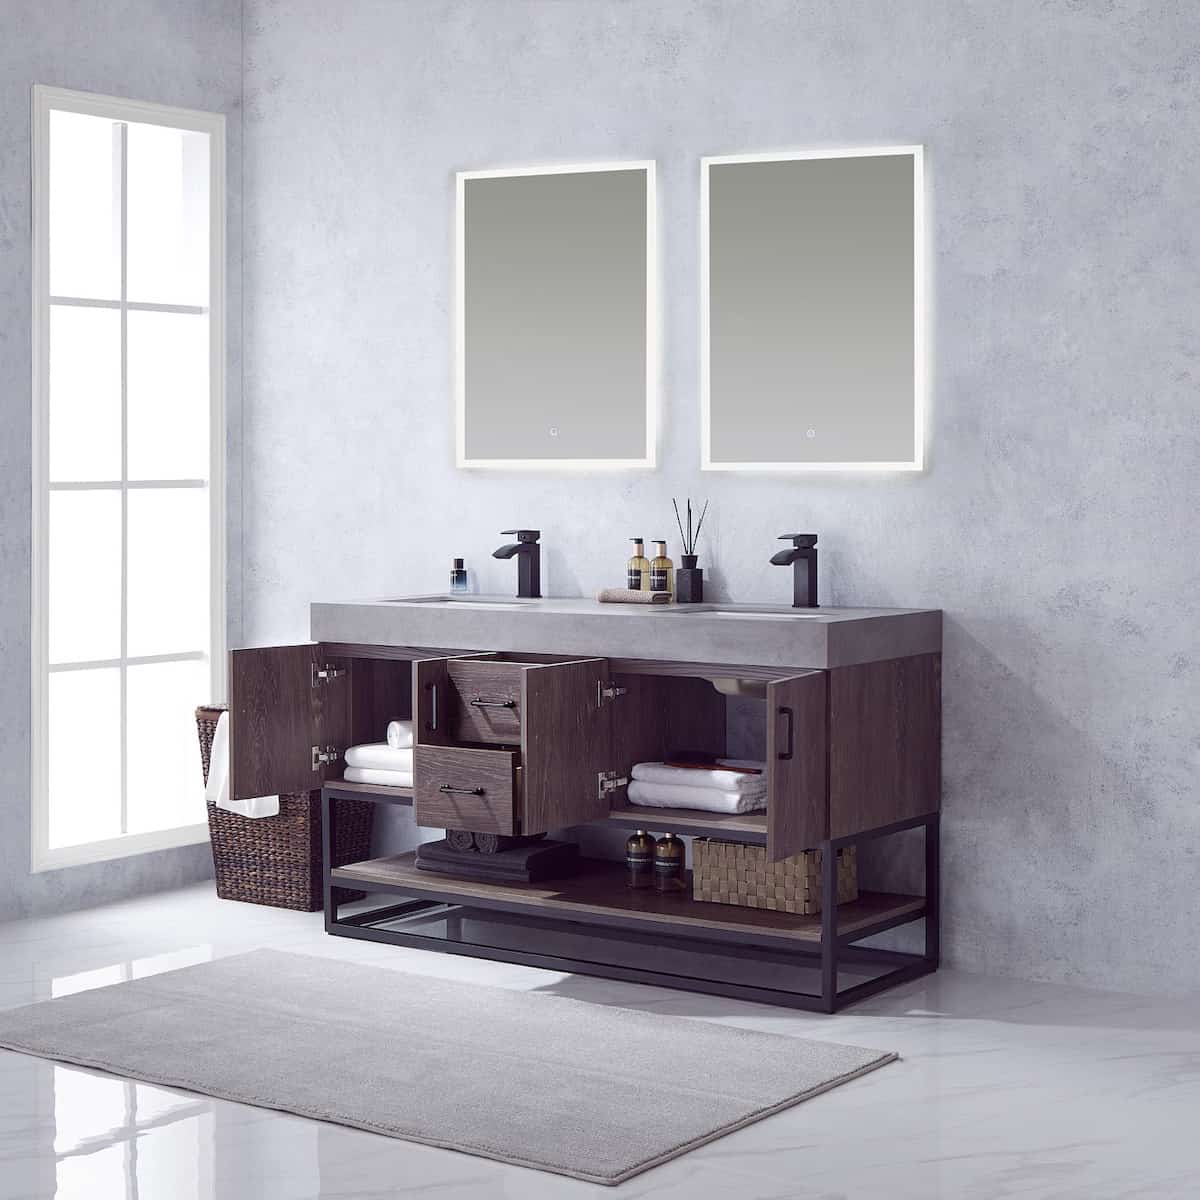 Vinnova Alistair 60 Inch Freestanding Double Sink Bath Vanity in North Carolina Oak and Matte Black Frame with Grey Sintered Stone Top With Mirrors in Bathroom 789060B-NC-WK